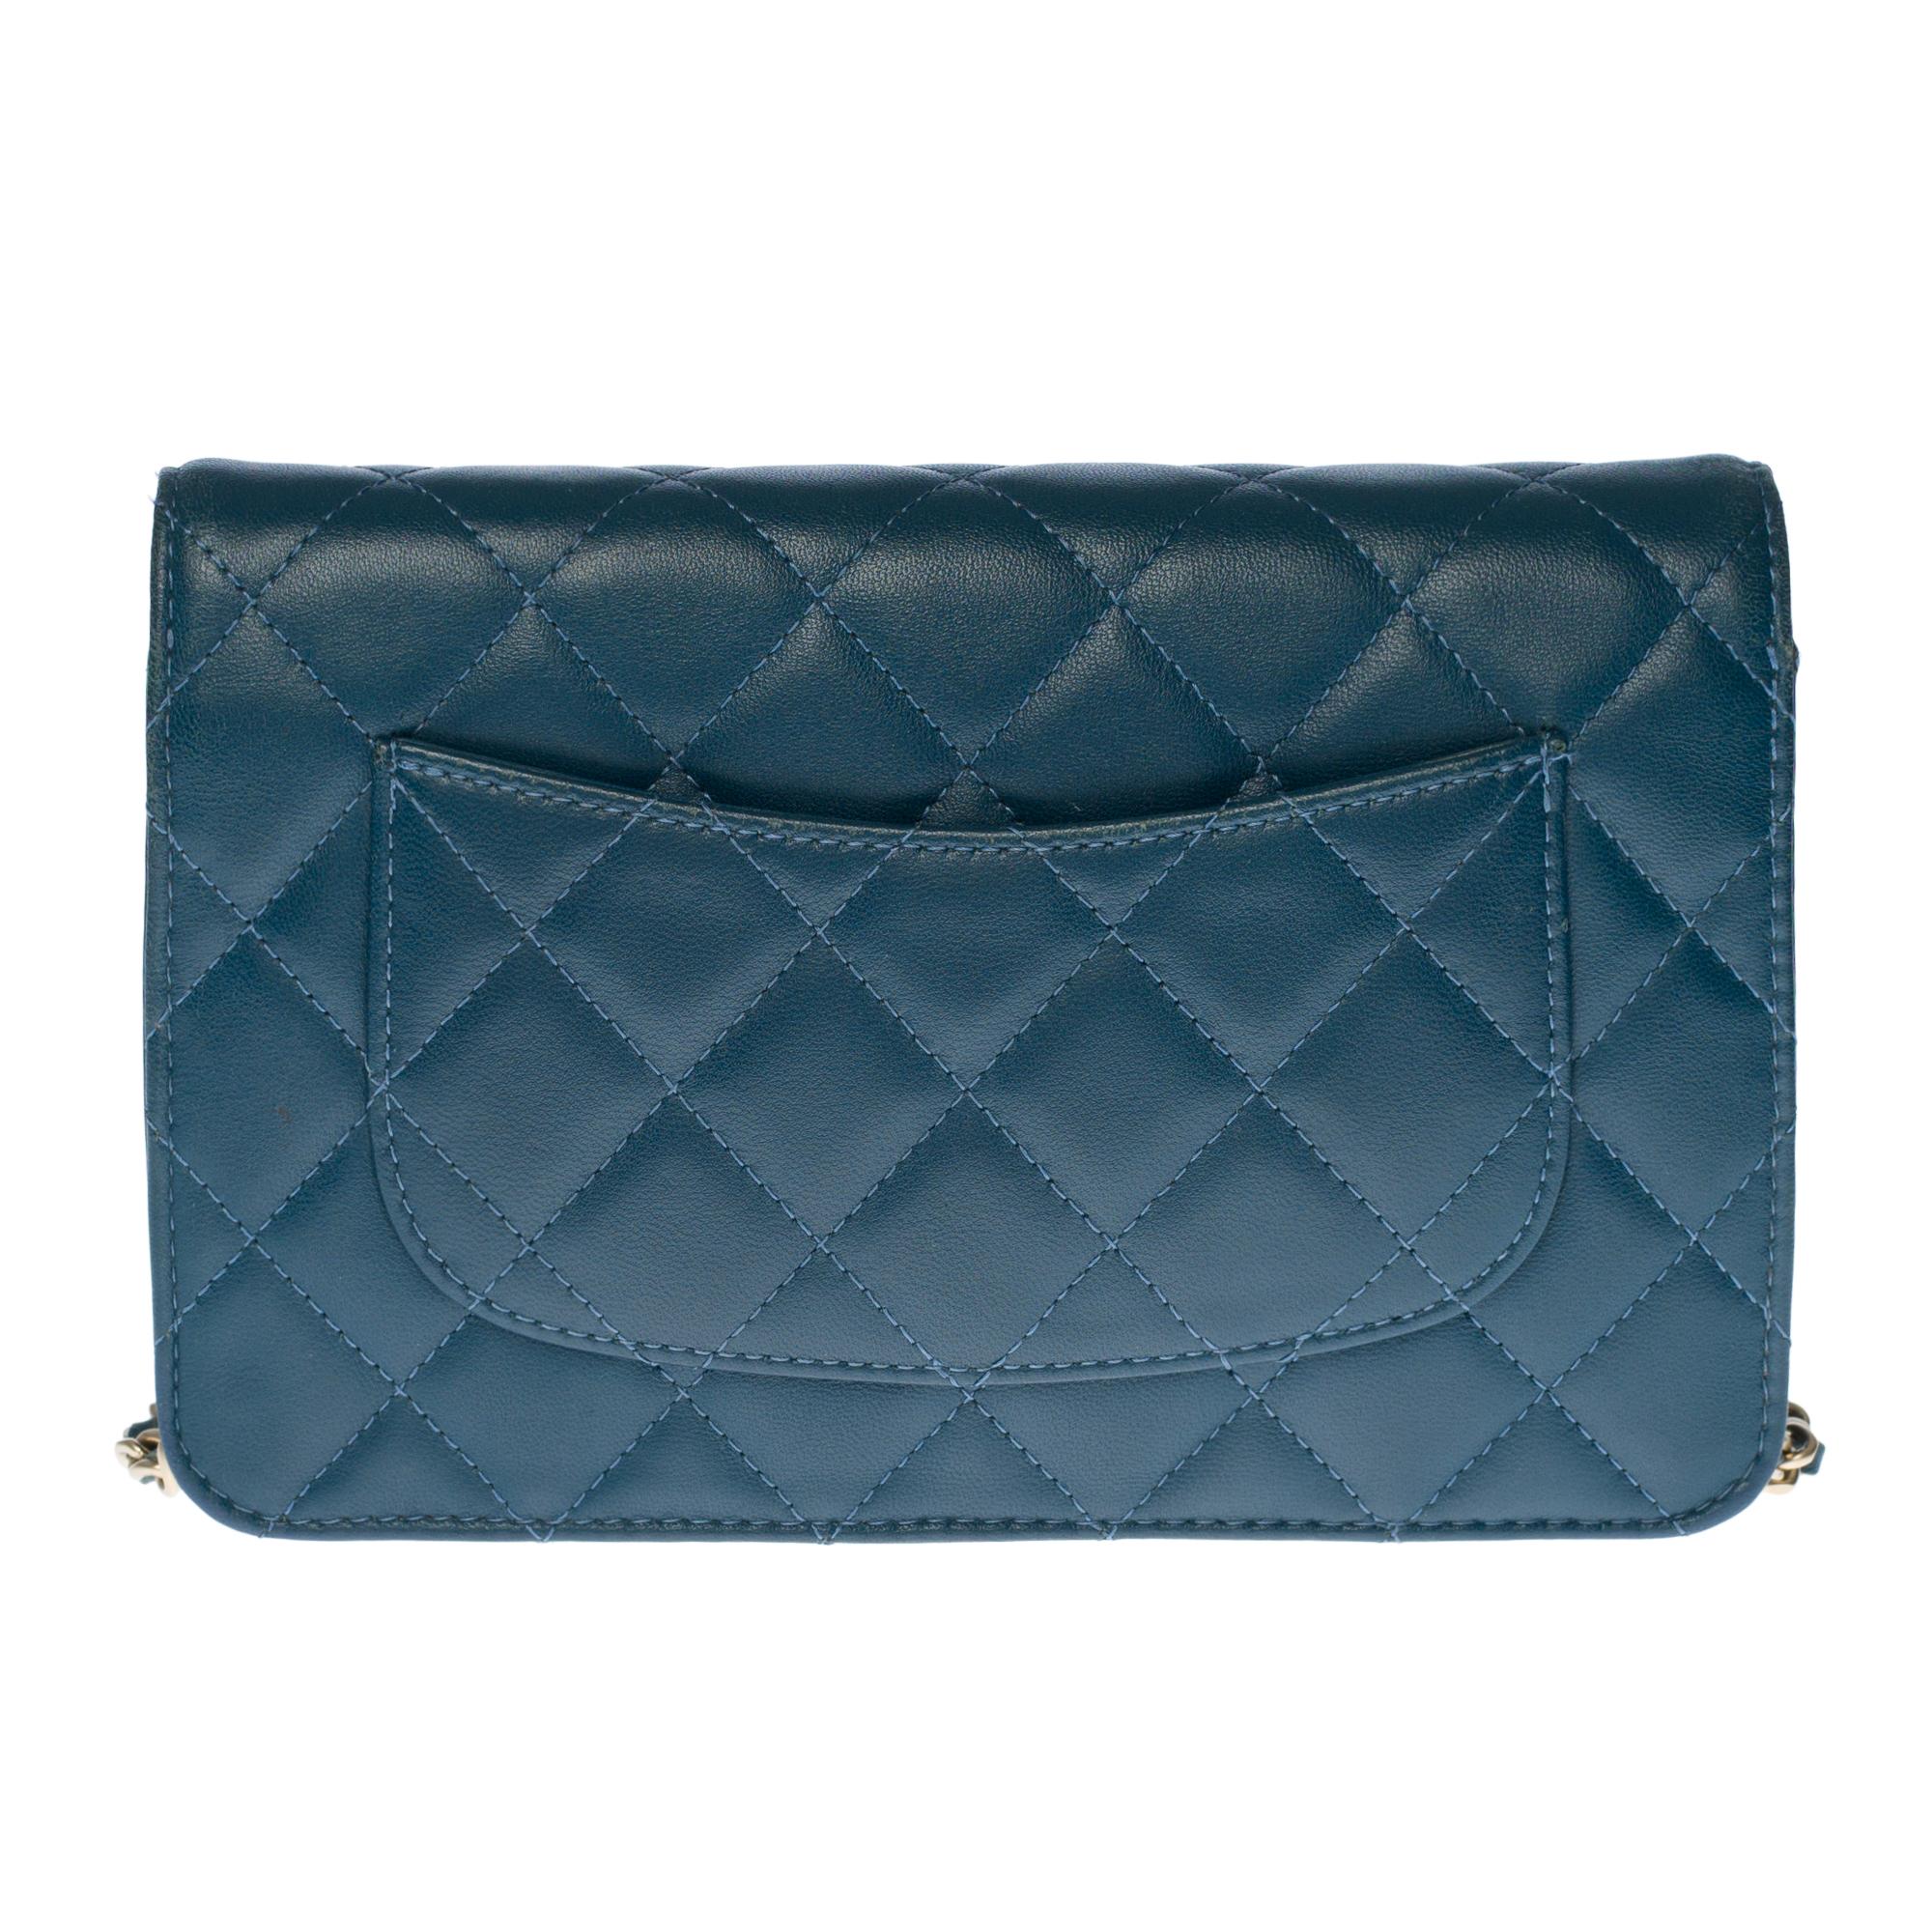 Lovely Chanel Wallet on Chain (WOC) shoulder bag in blue quilted leather, gold-tone metal hardware, a gold-tone metal chain handle intertwined with blue leather allowing a shoulder or shoulder strap.

Closure by flap.
Lining in blue leather, one zip